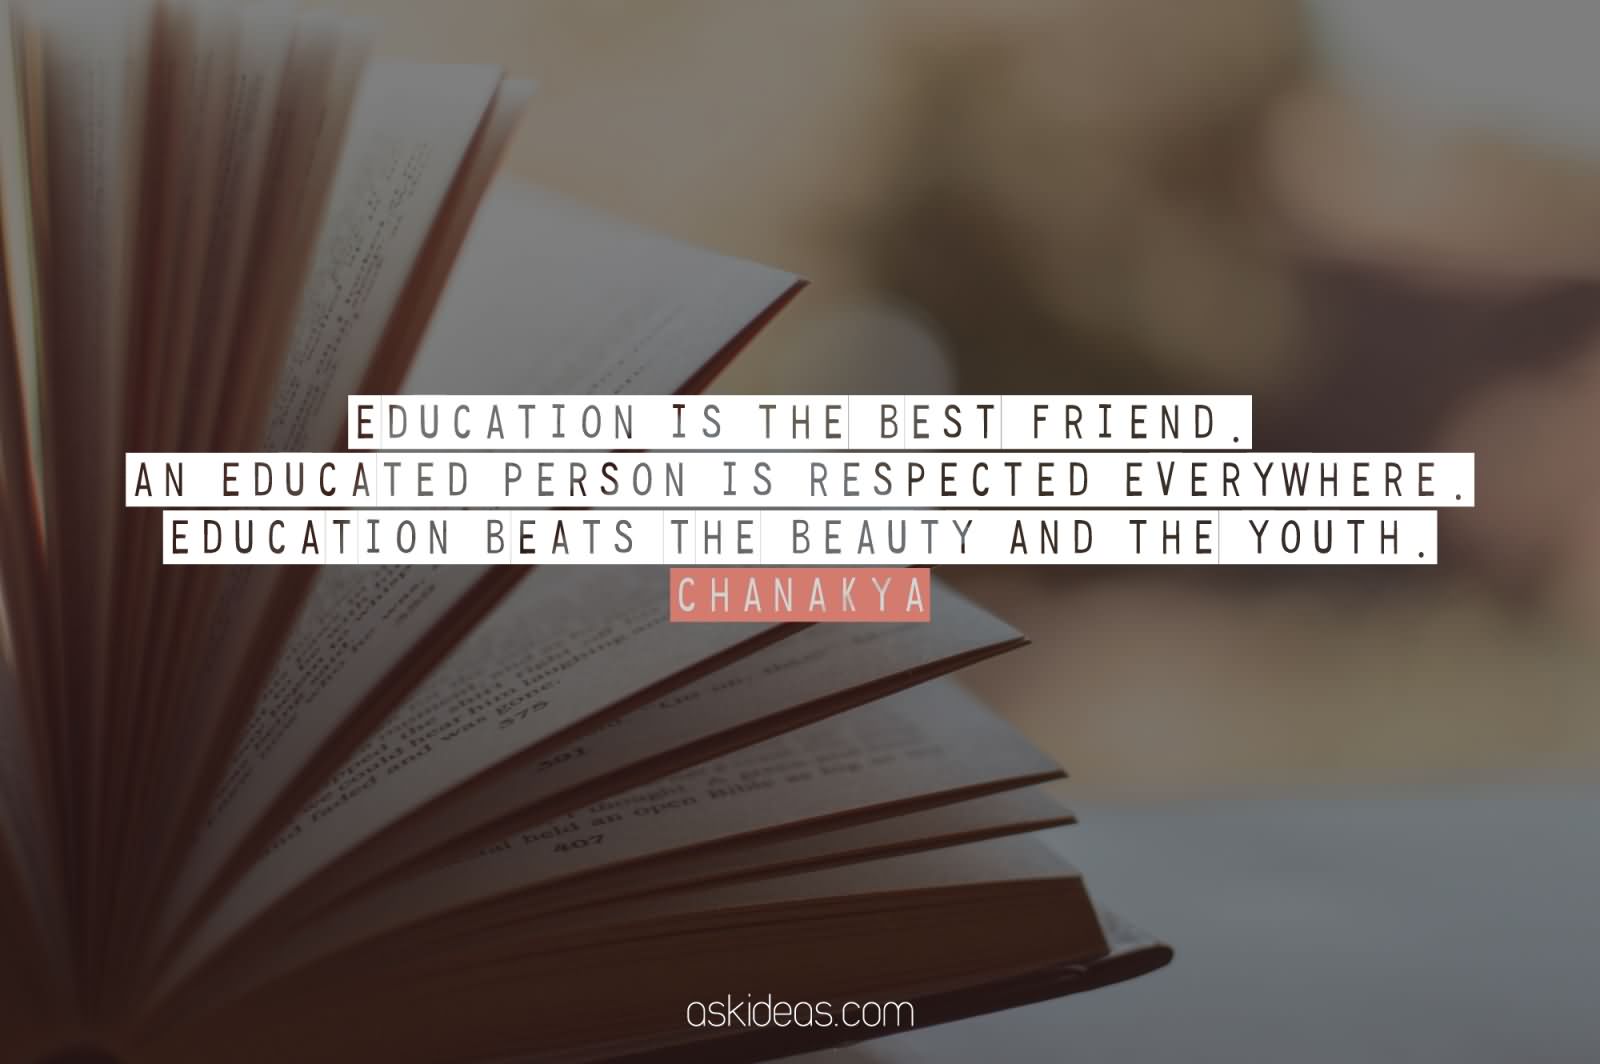 Education is the best friend. An educated person is respected everywhere. Education beats the beauty and the youth. Chanakya